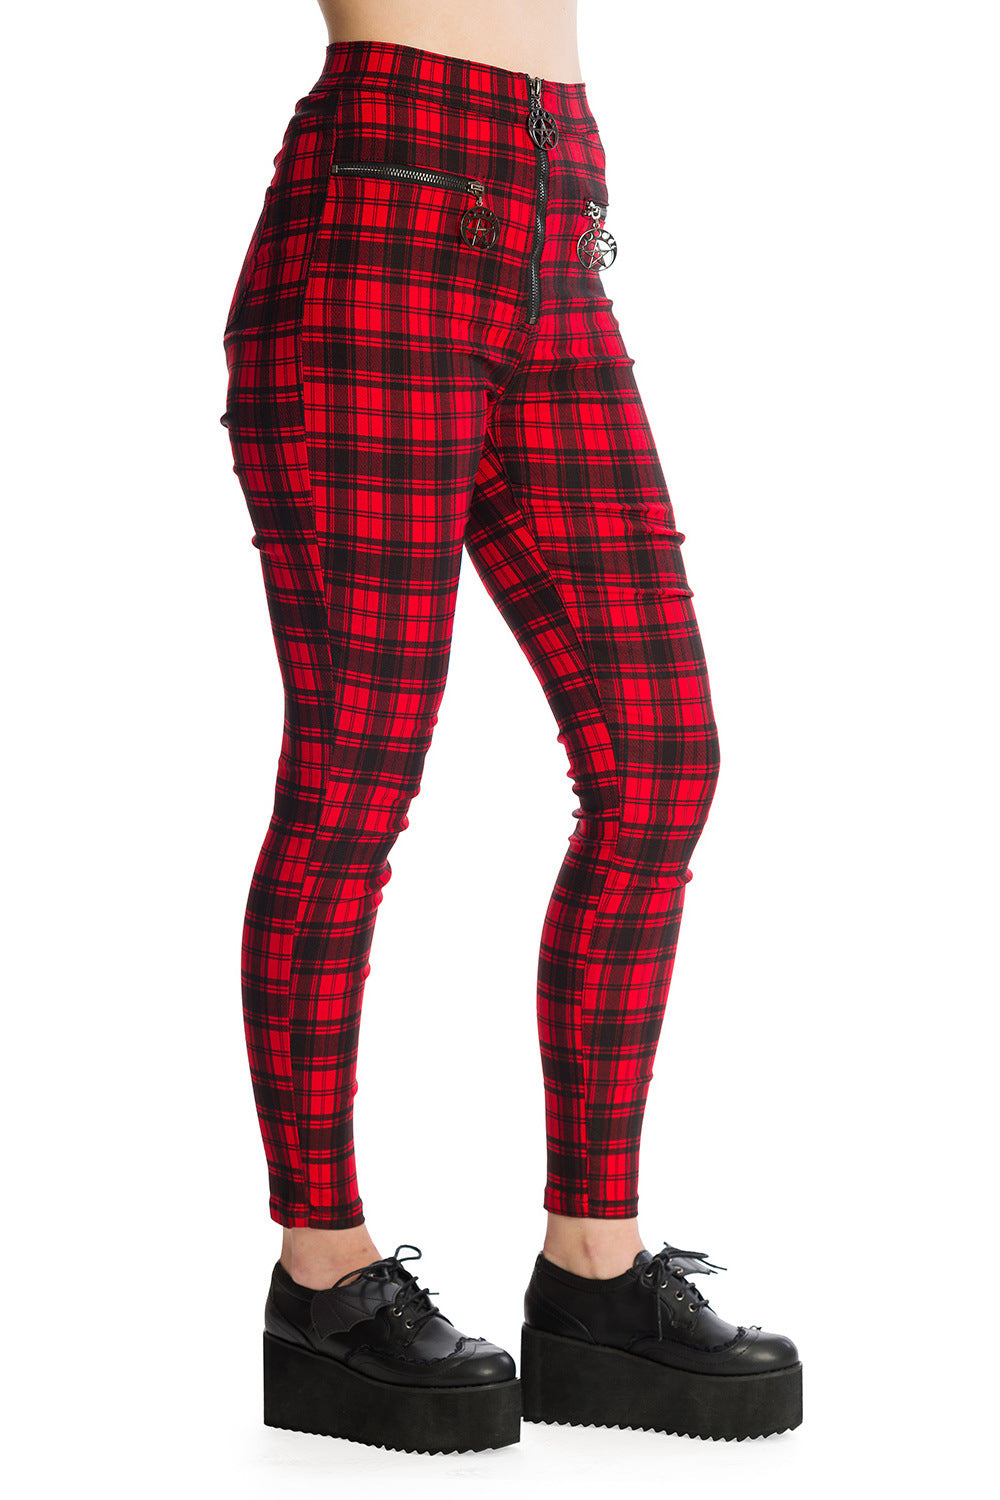 ALVIN - Grey Pink Check Trousers – Marc Darcy